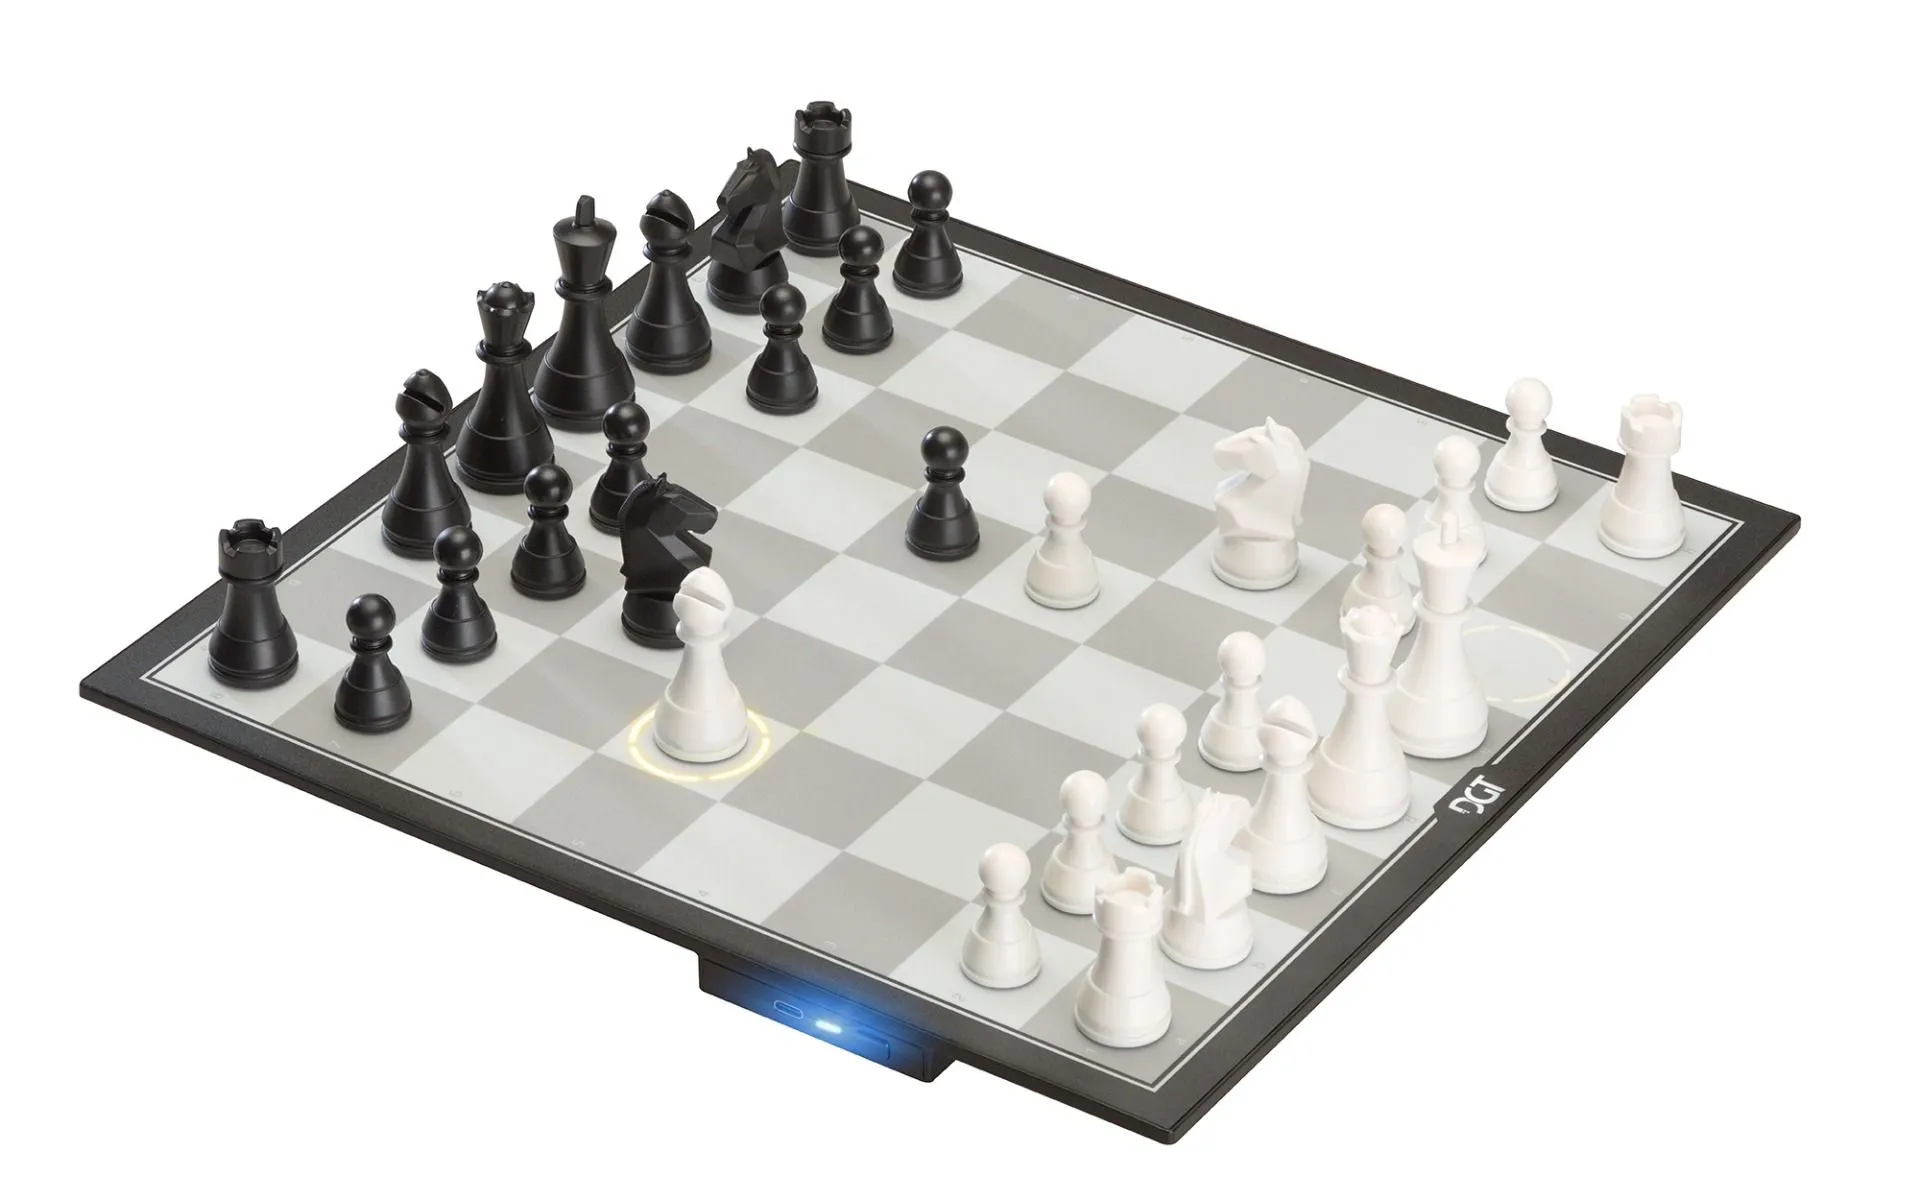  DGT Pegasus Revolutionary Electronic Chess Board Computer for  Online Game Play : Toys & Games